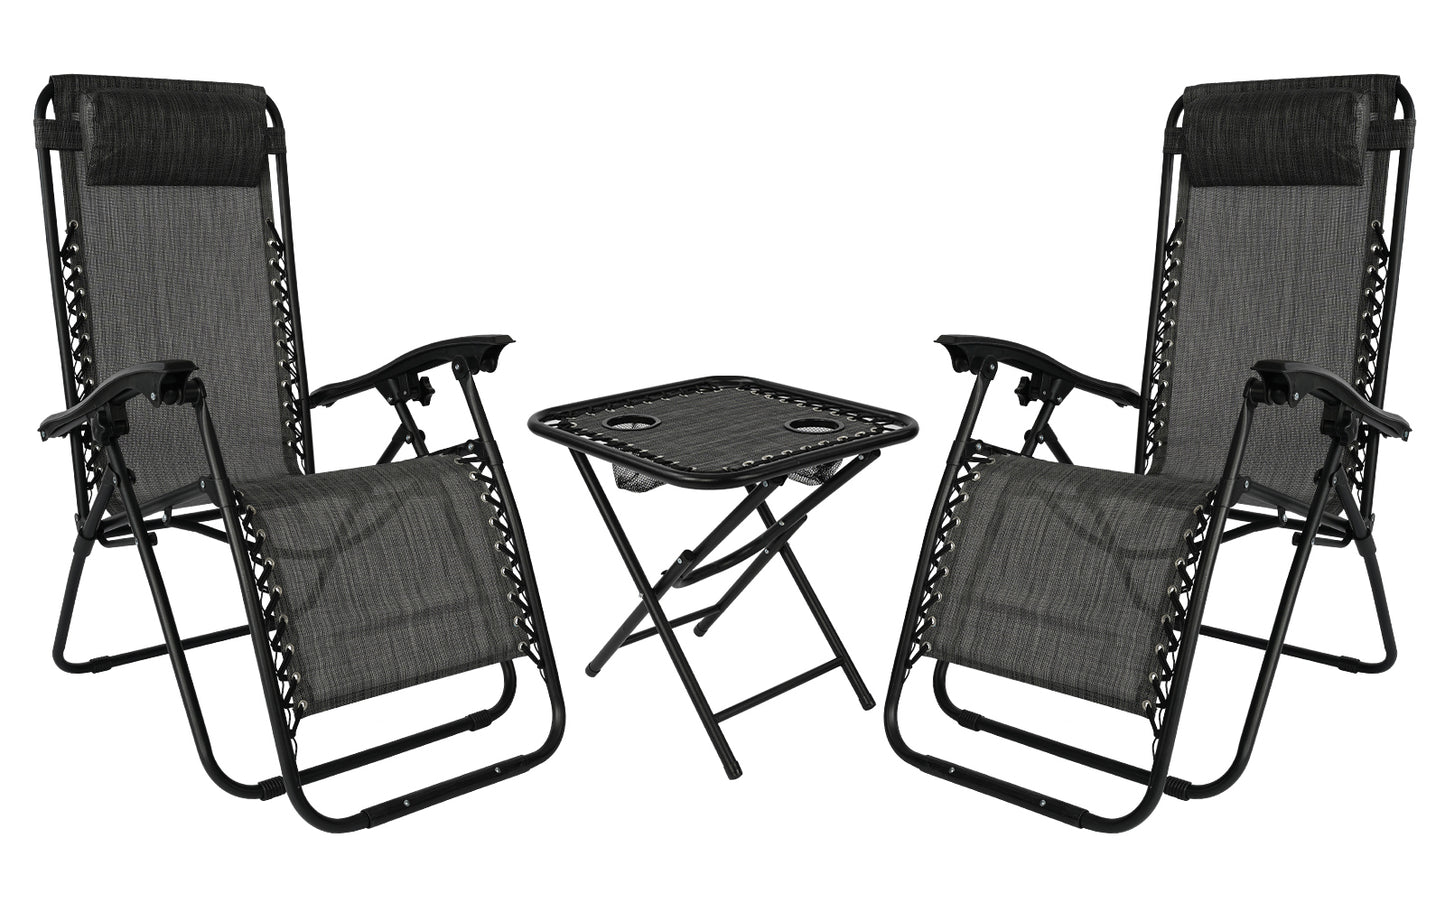 2 x Anti Gravity Chairs & Side Table - Grey